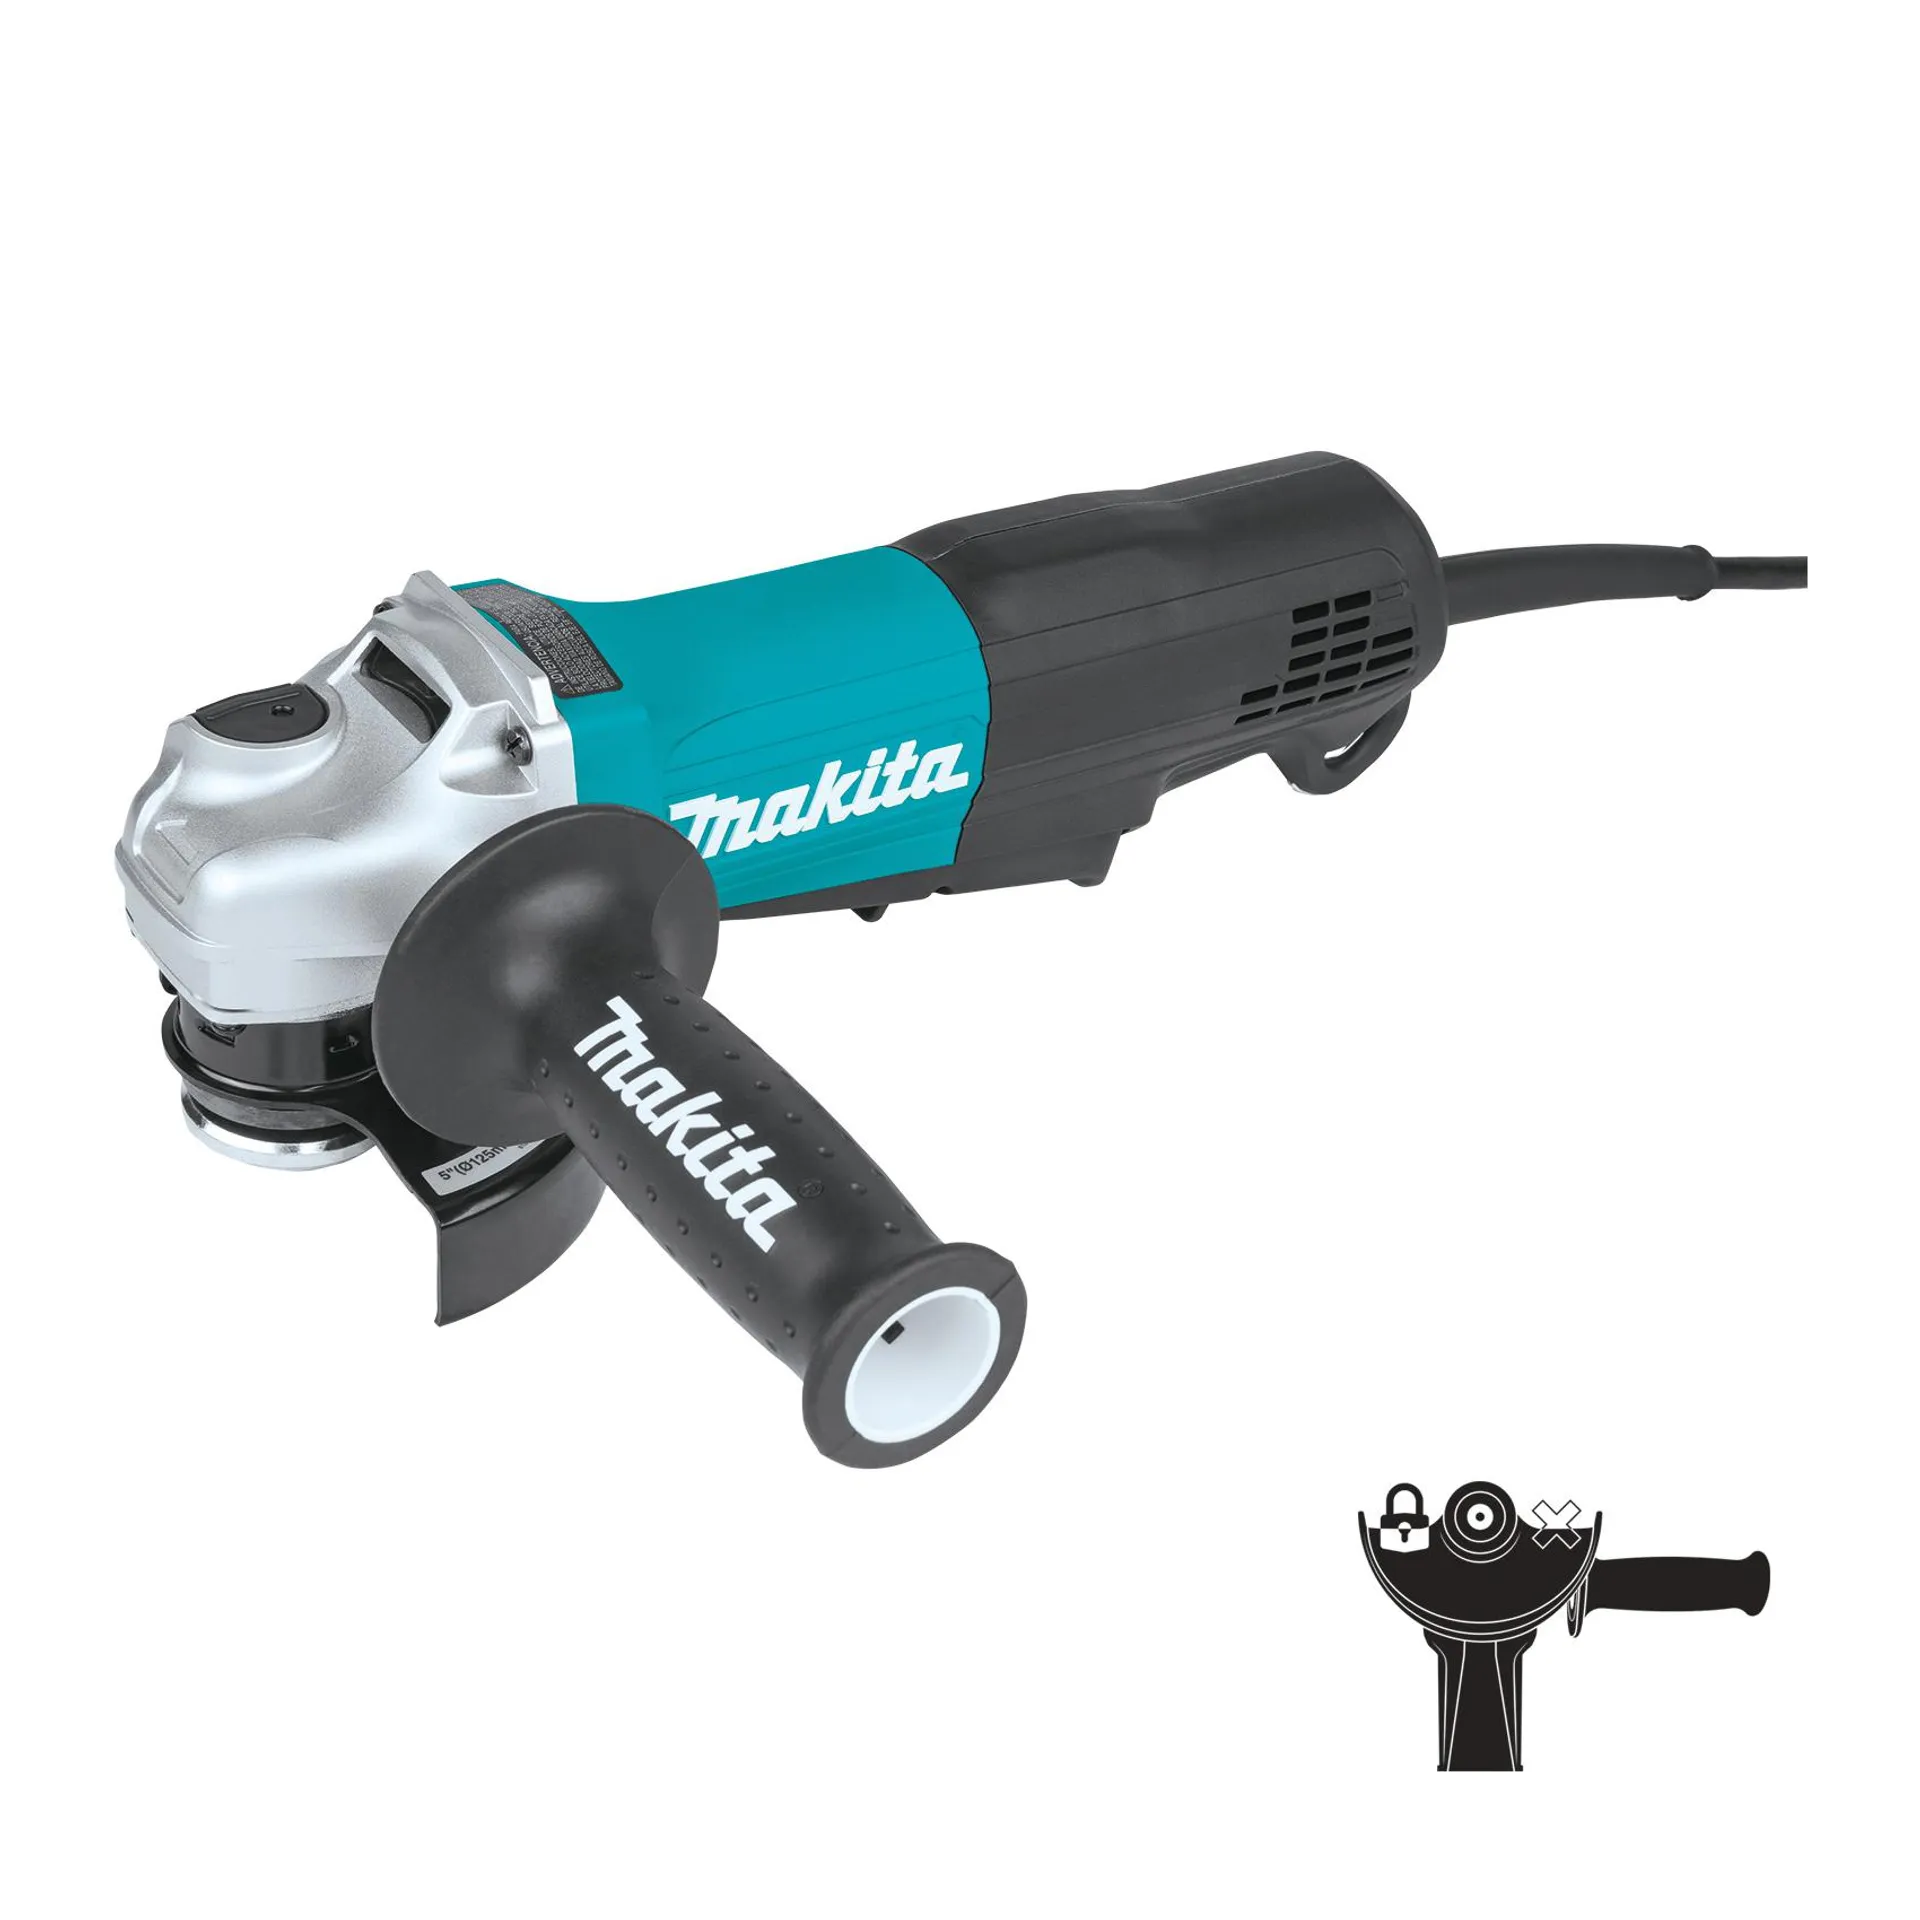 GA5053R Angle Grinder with Non-Removable Guard, 11 A, 5/8 in Spindle, 5 in Dia Wheel, 11,000 rpm Speed